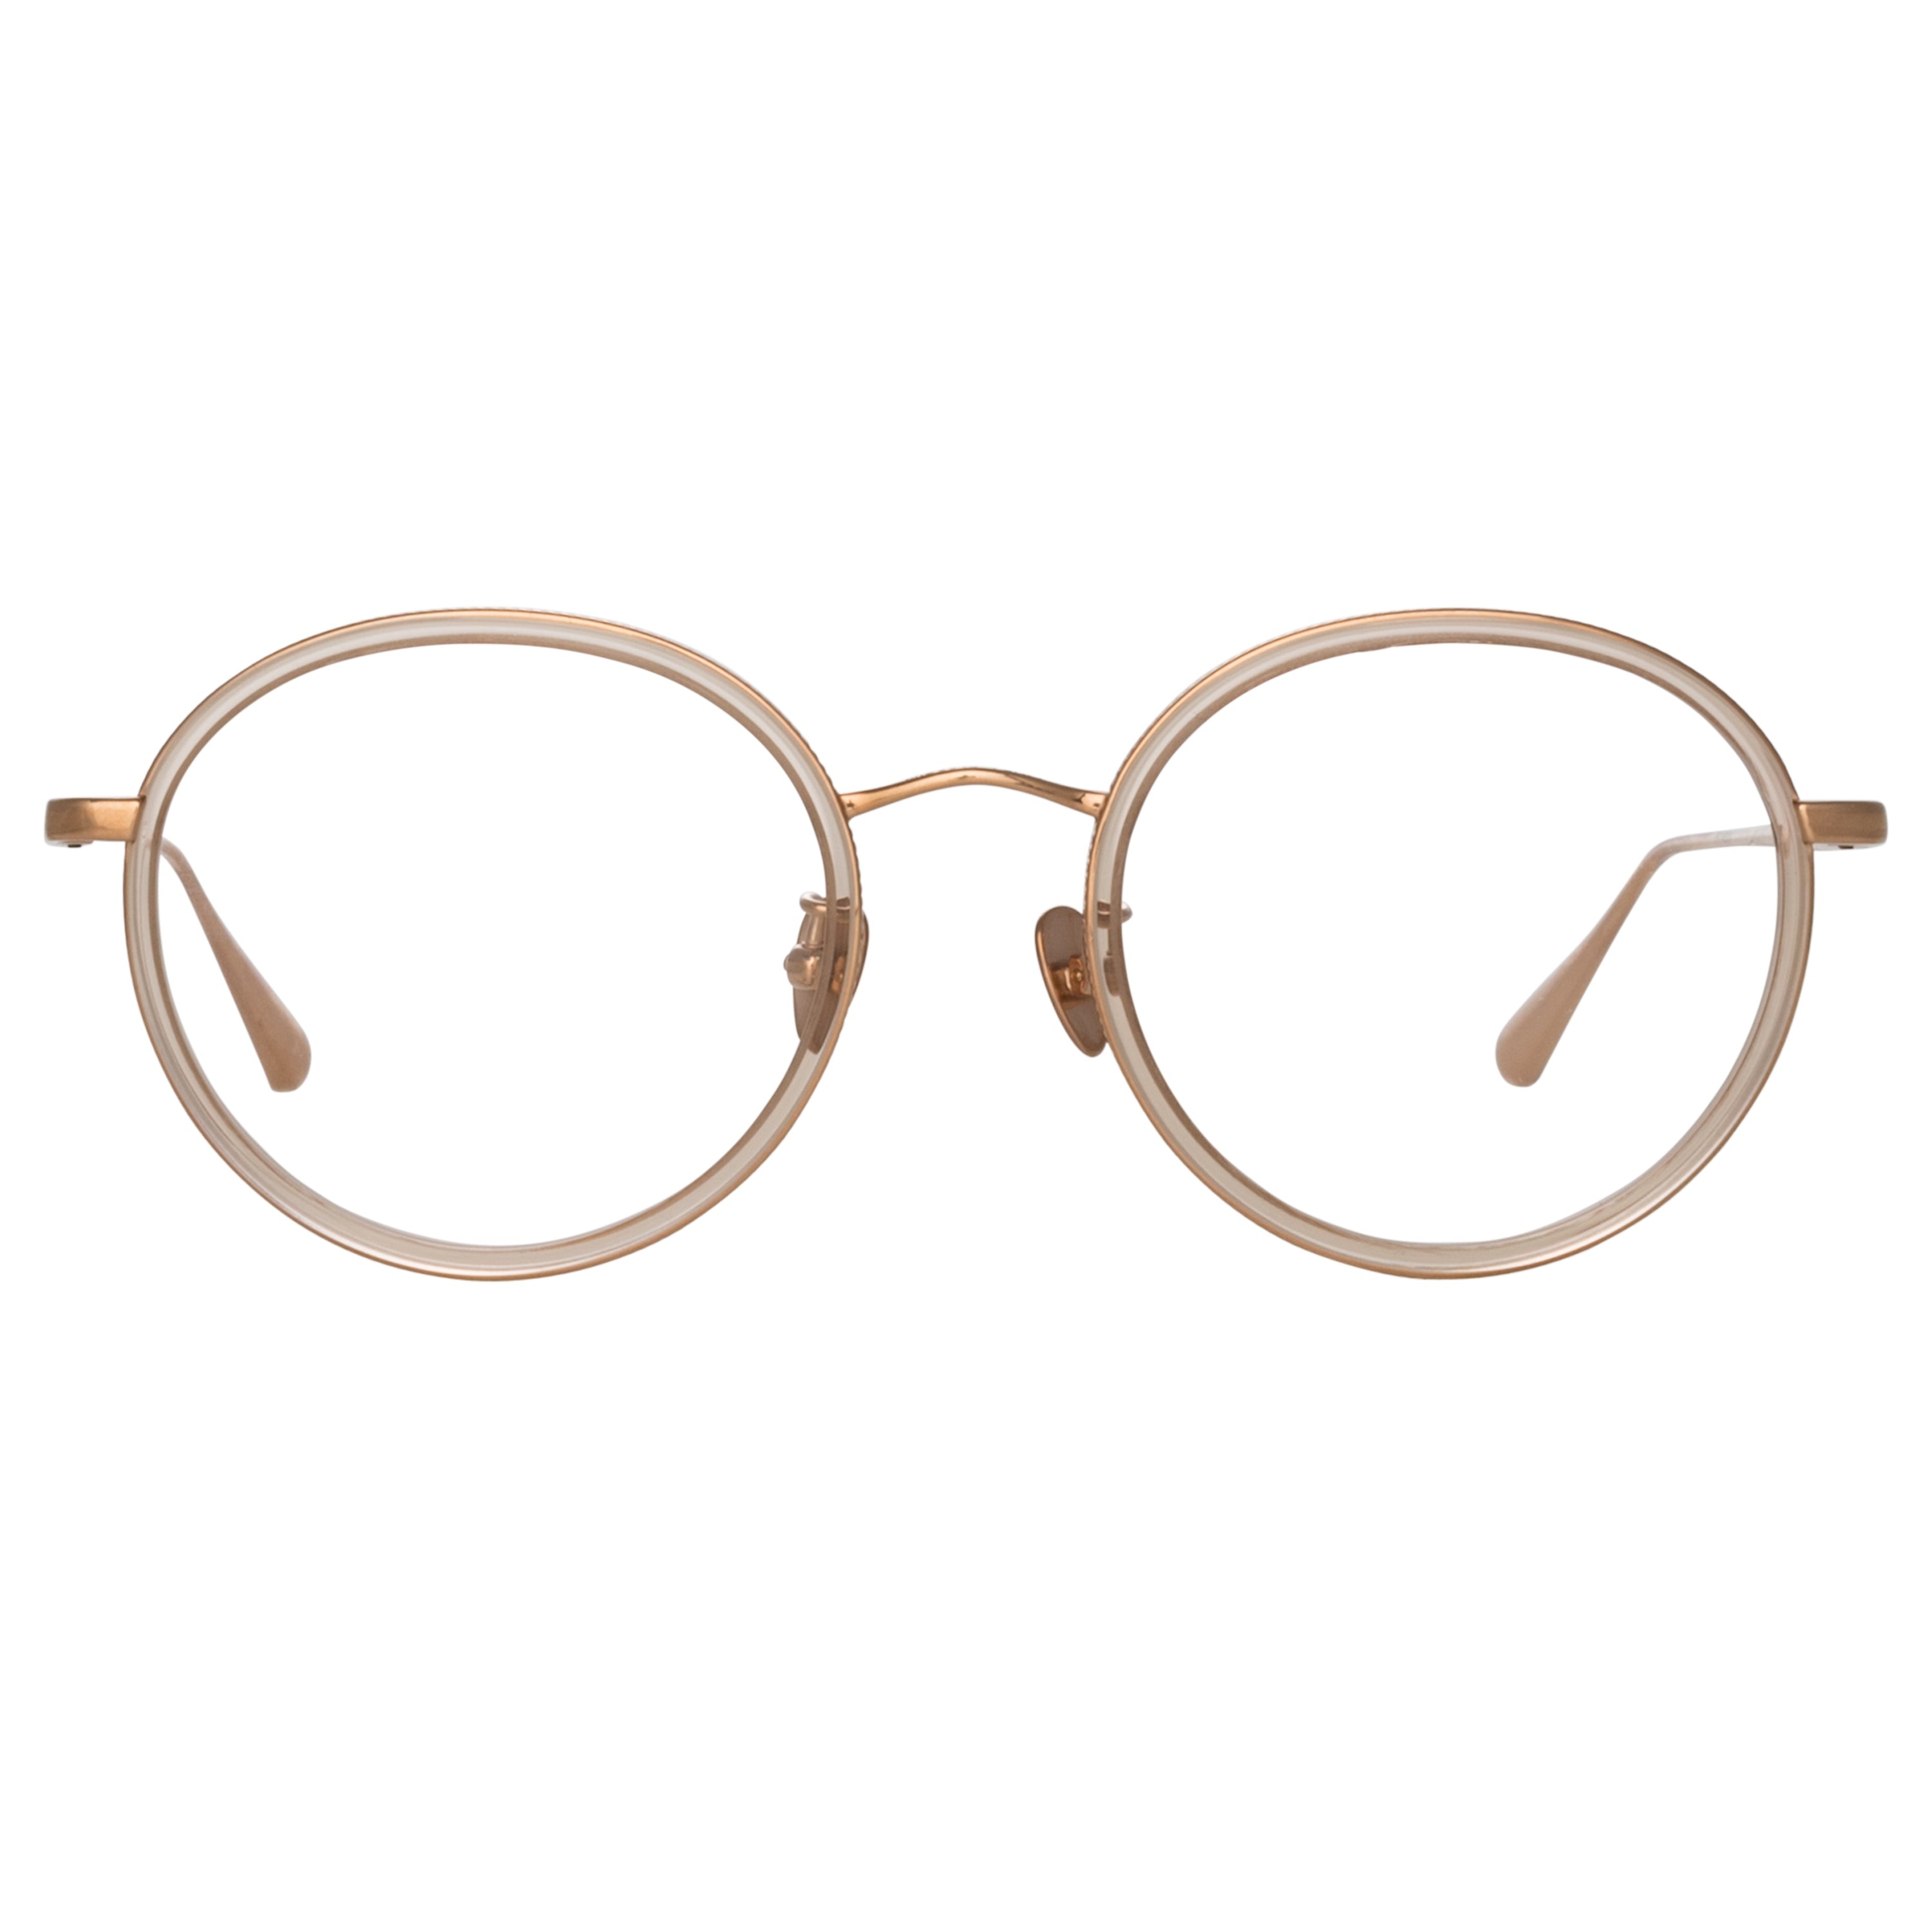 SATO OVAL OPTICAL FRAME IN ROSE GOLD - 1